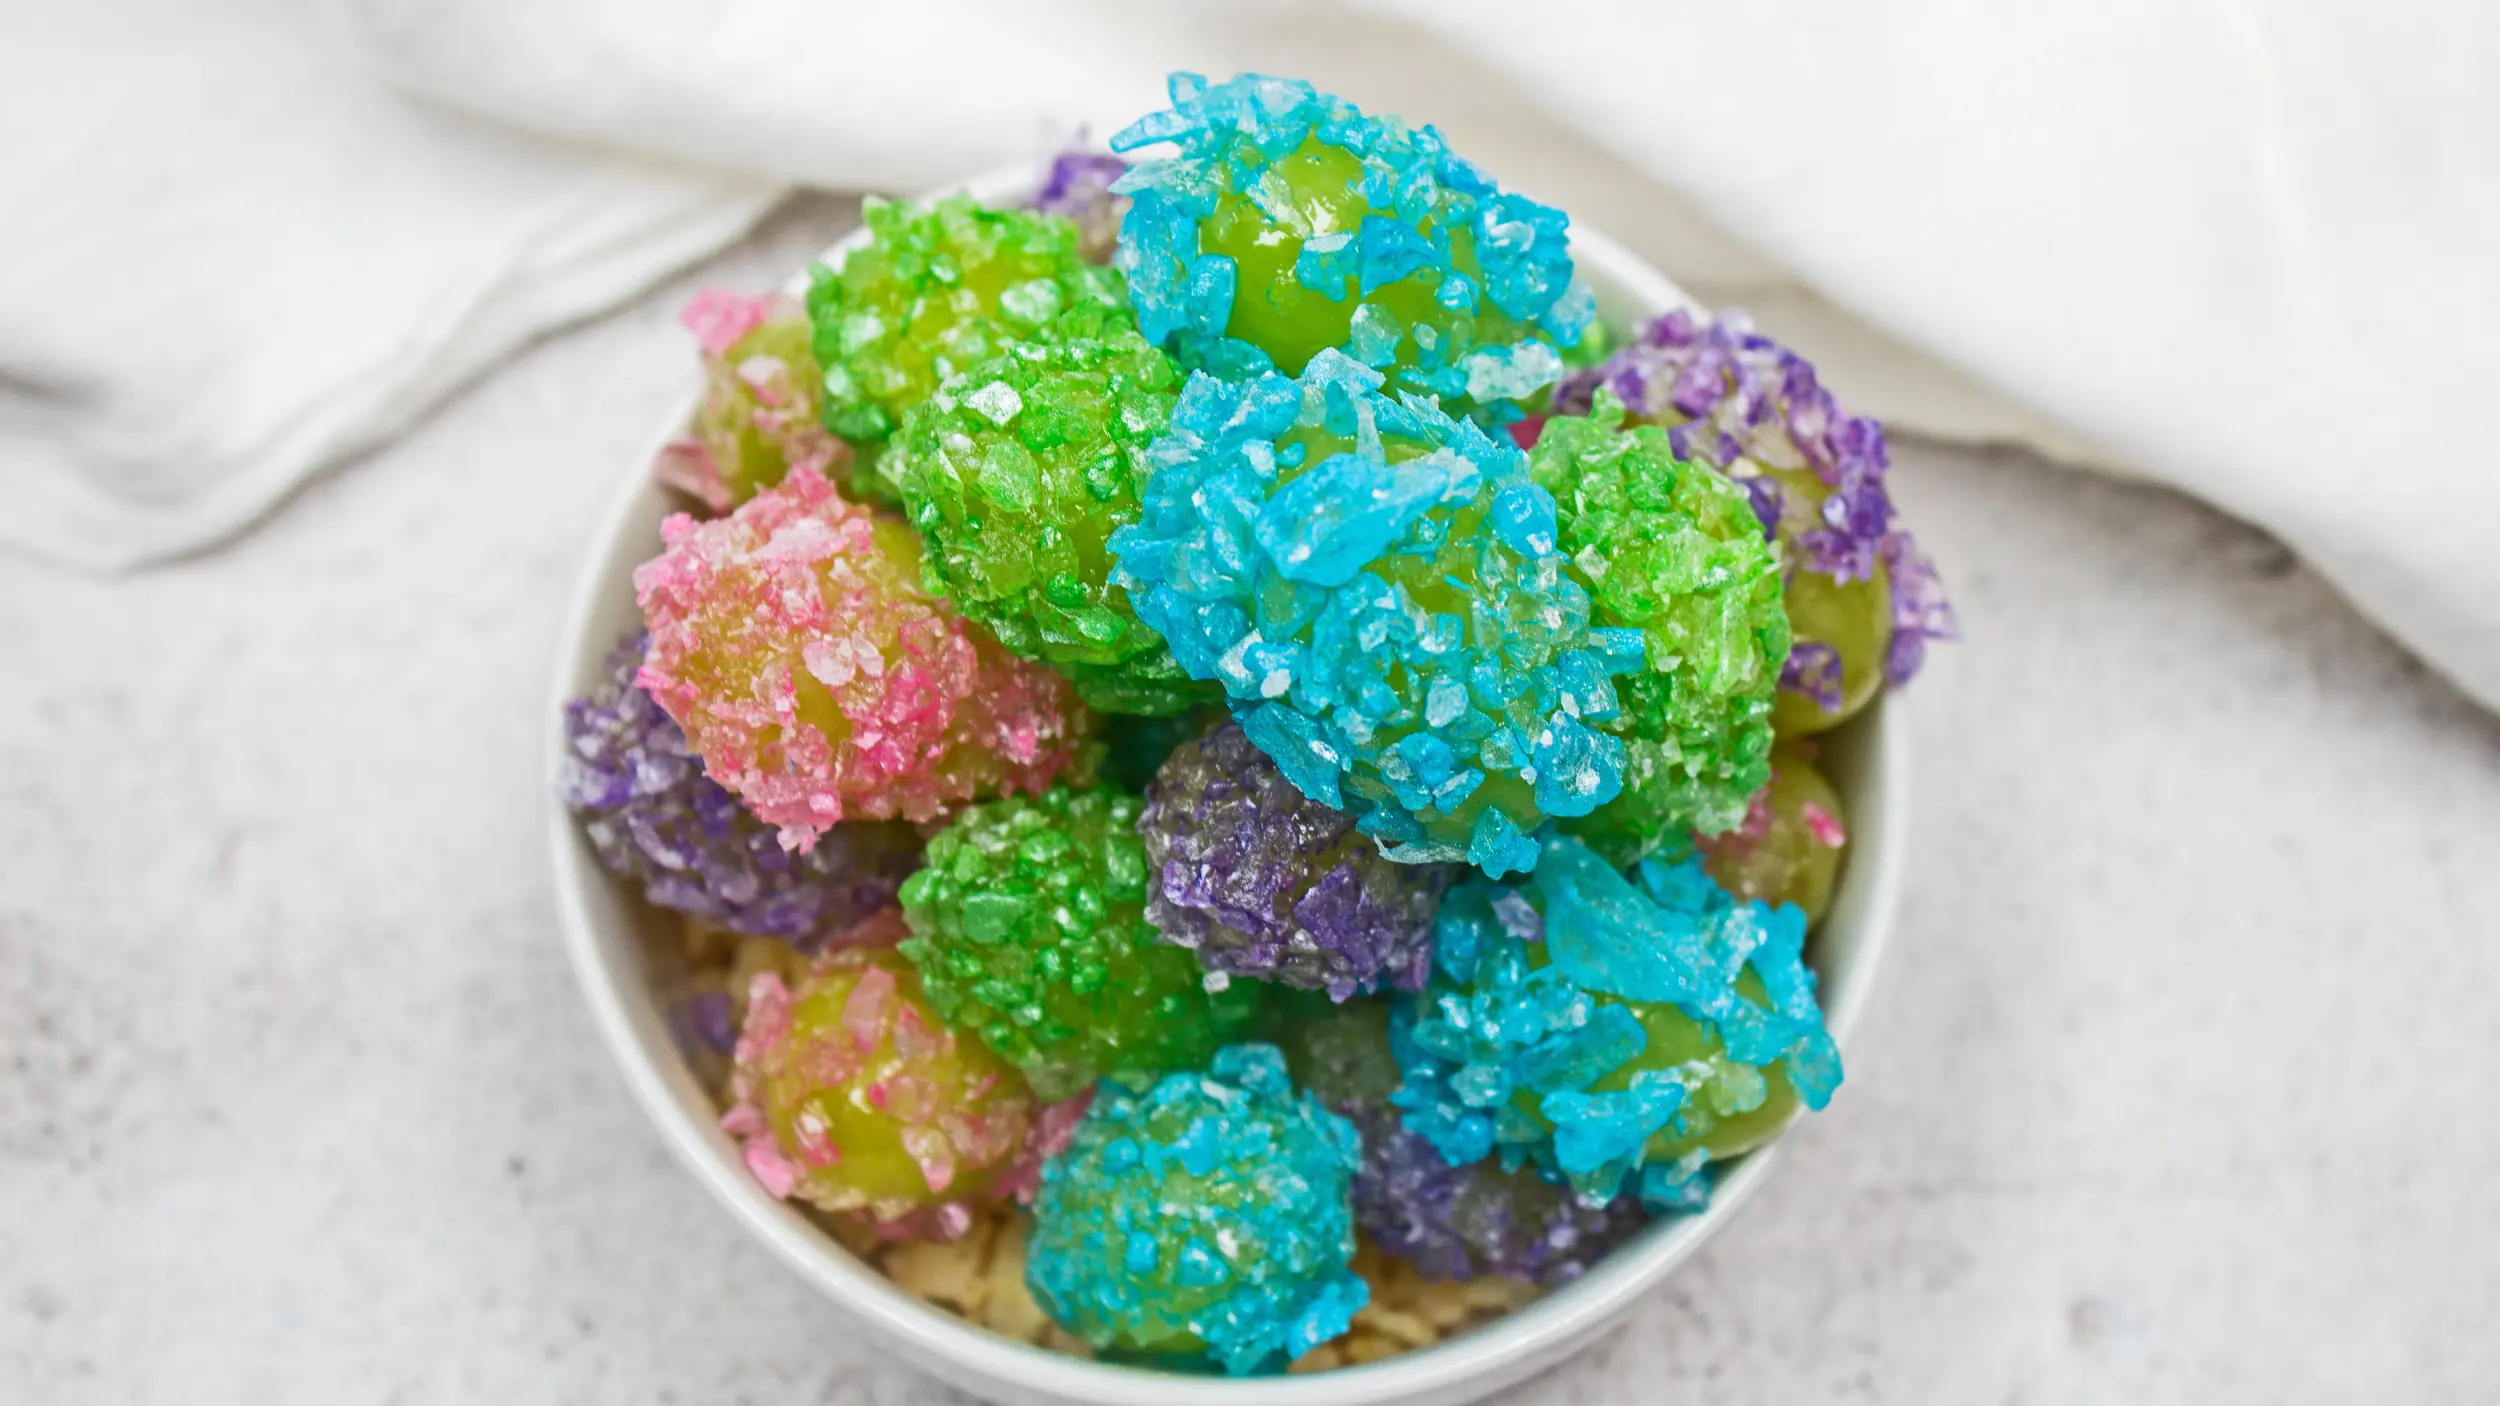 jolly rancher hard candy coated crack grapes in rainbow pastel colors.